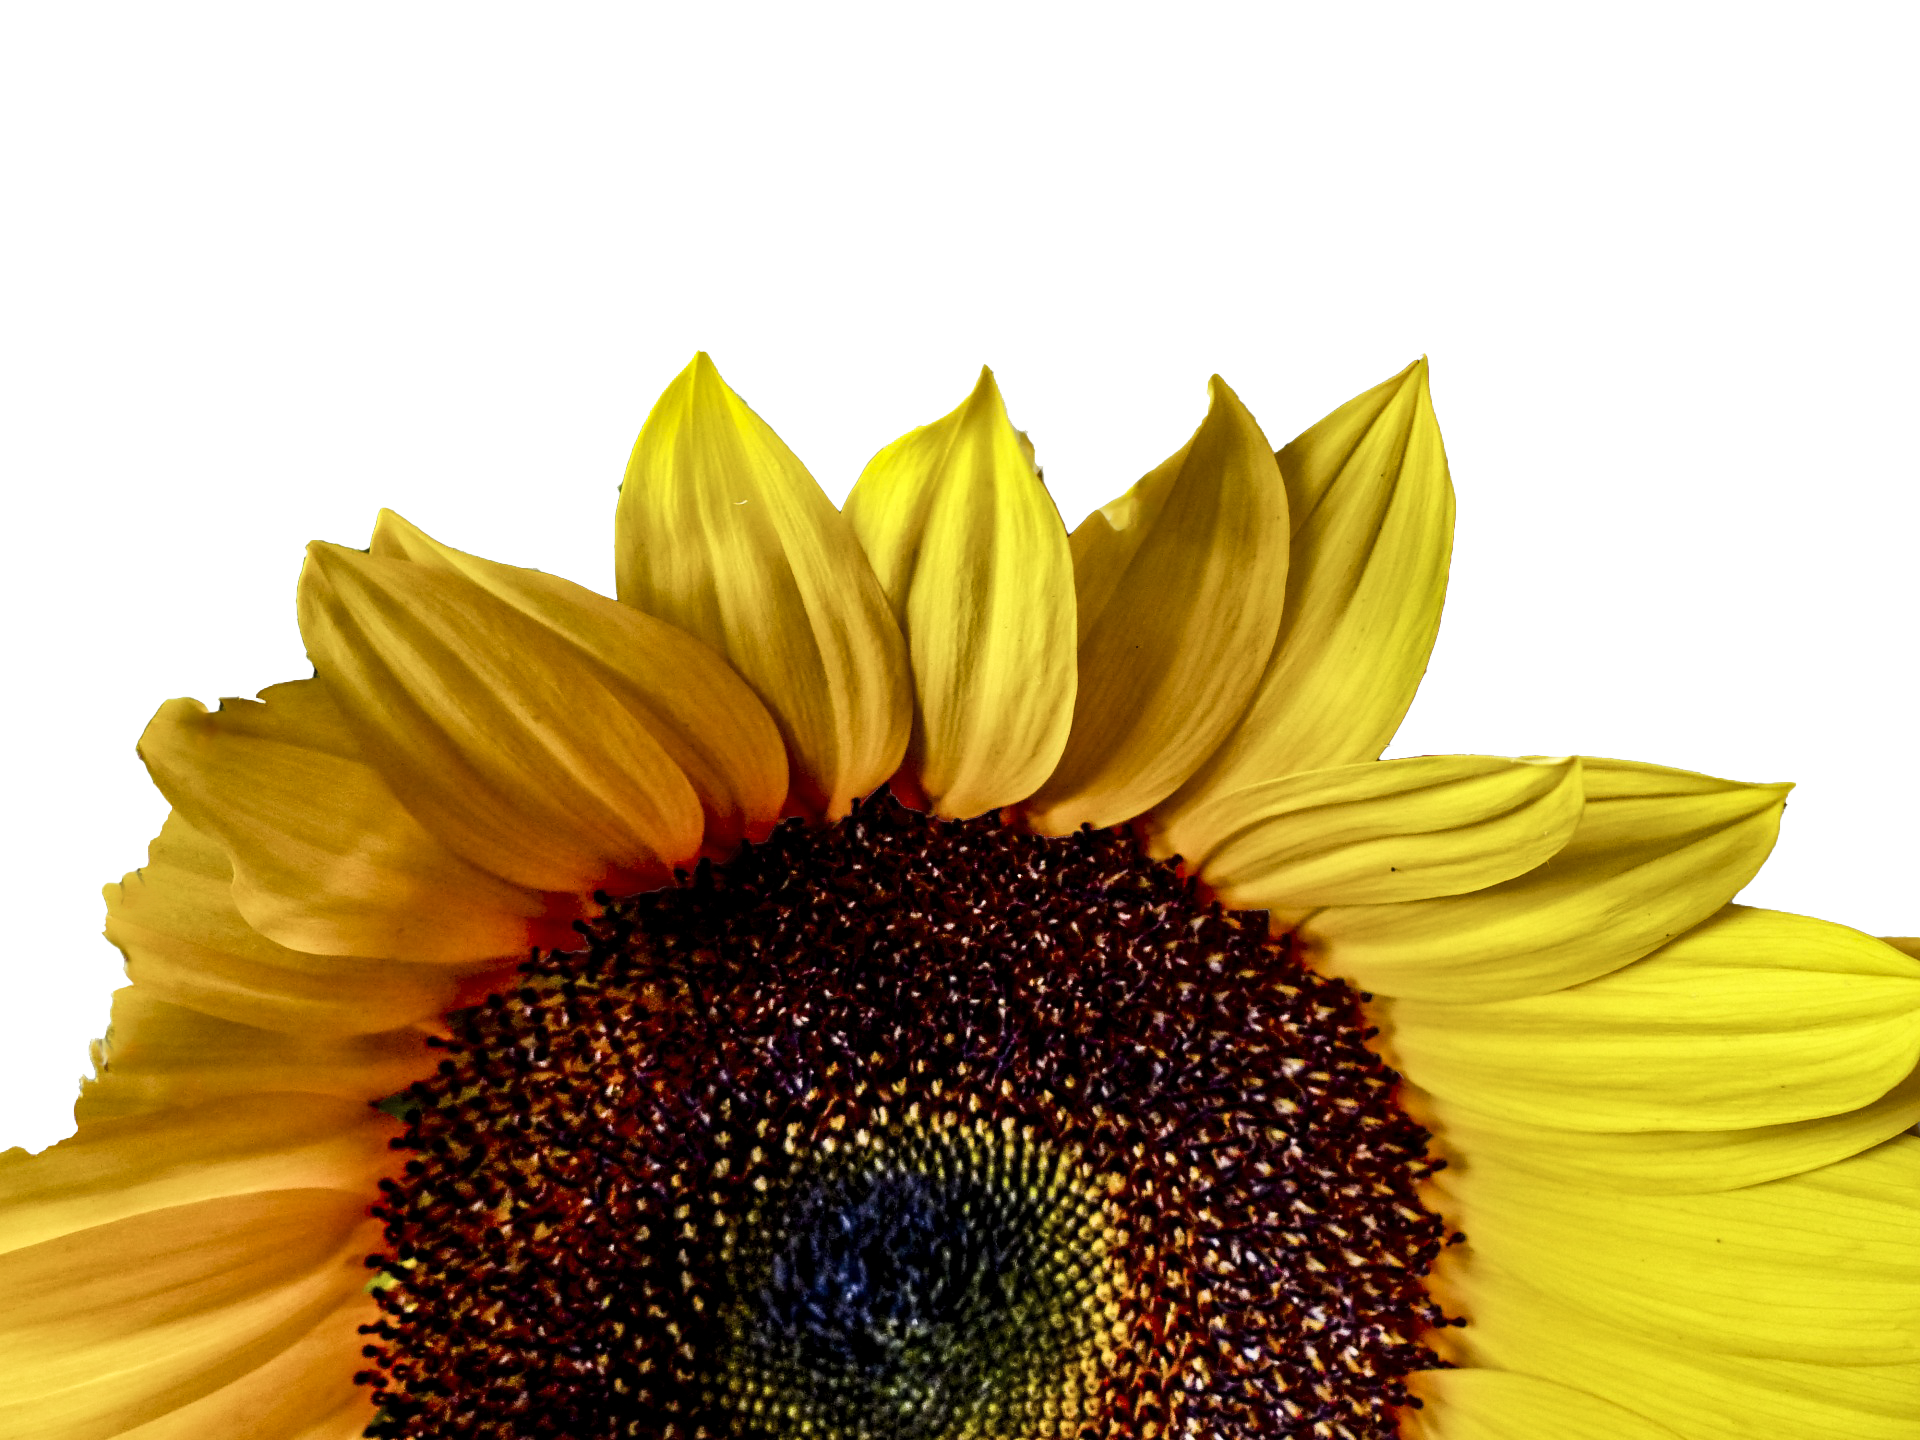 Sunflower Half With Copy Space